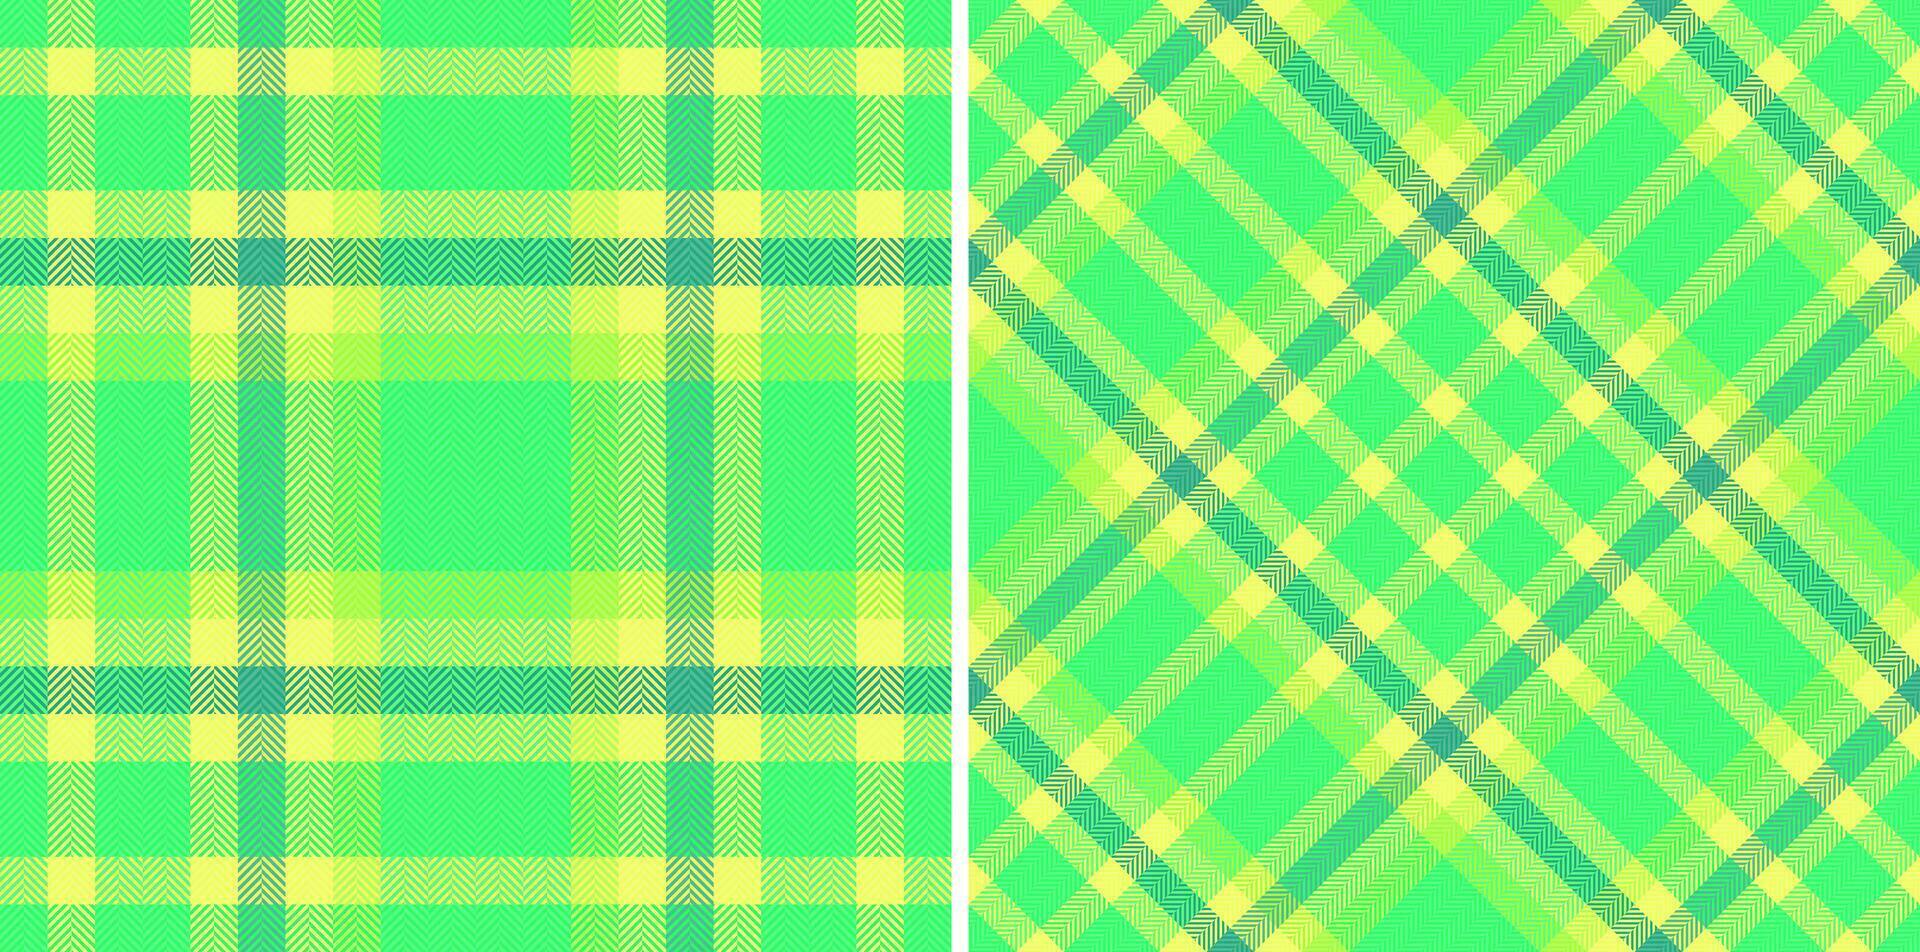 Tartan vector seamless of texture pattern fabric with a textile check plaid background.